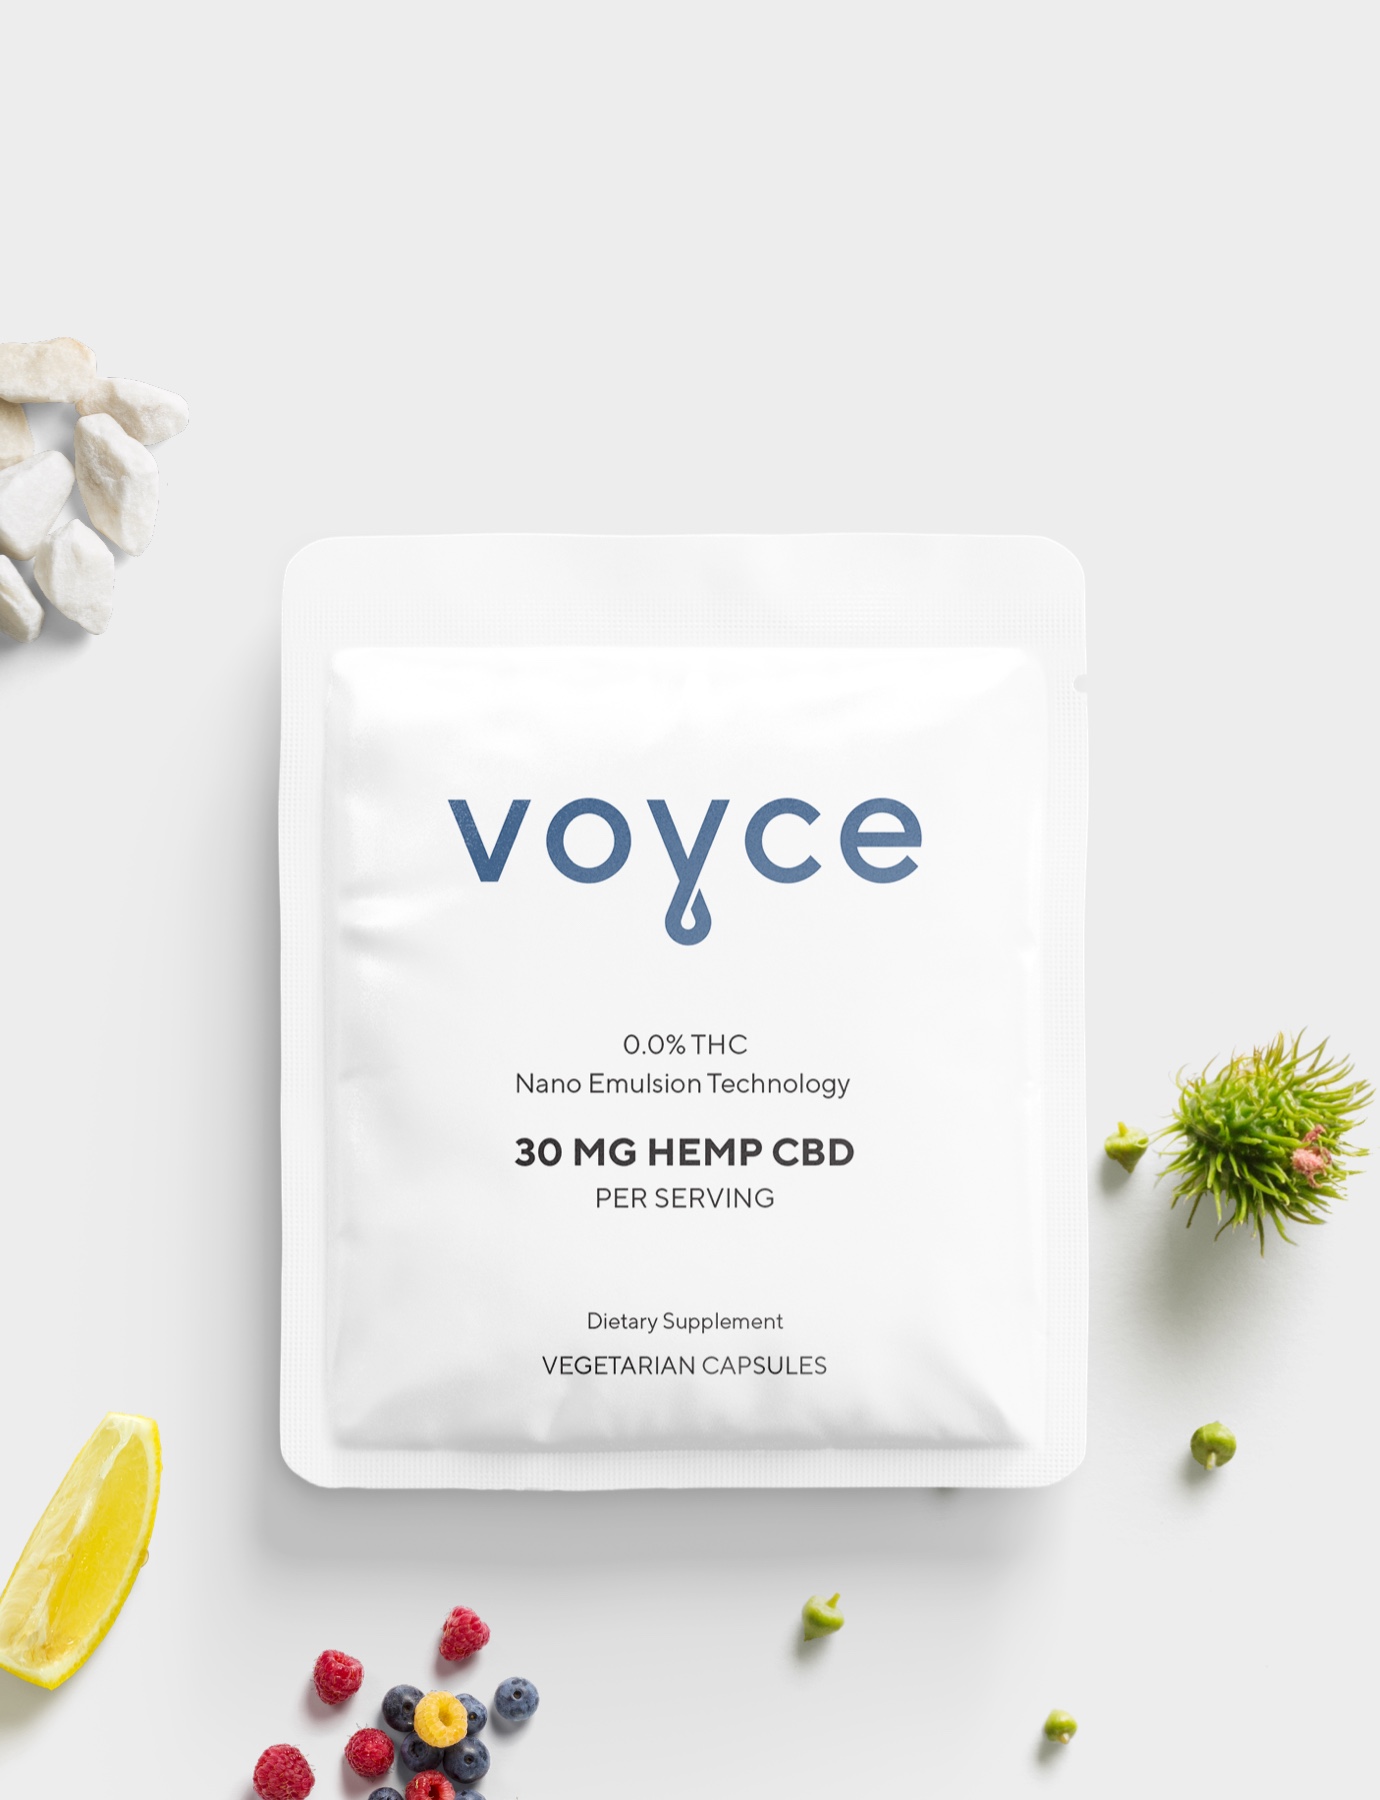 Packaging design for Voyce CBD by Rareview